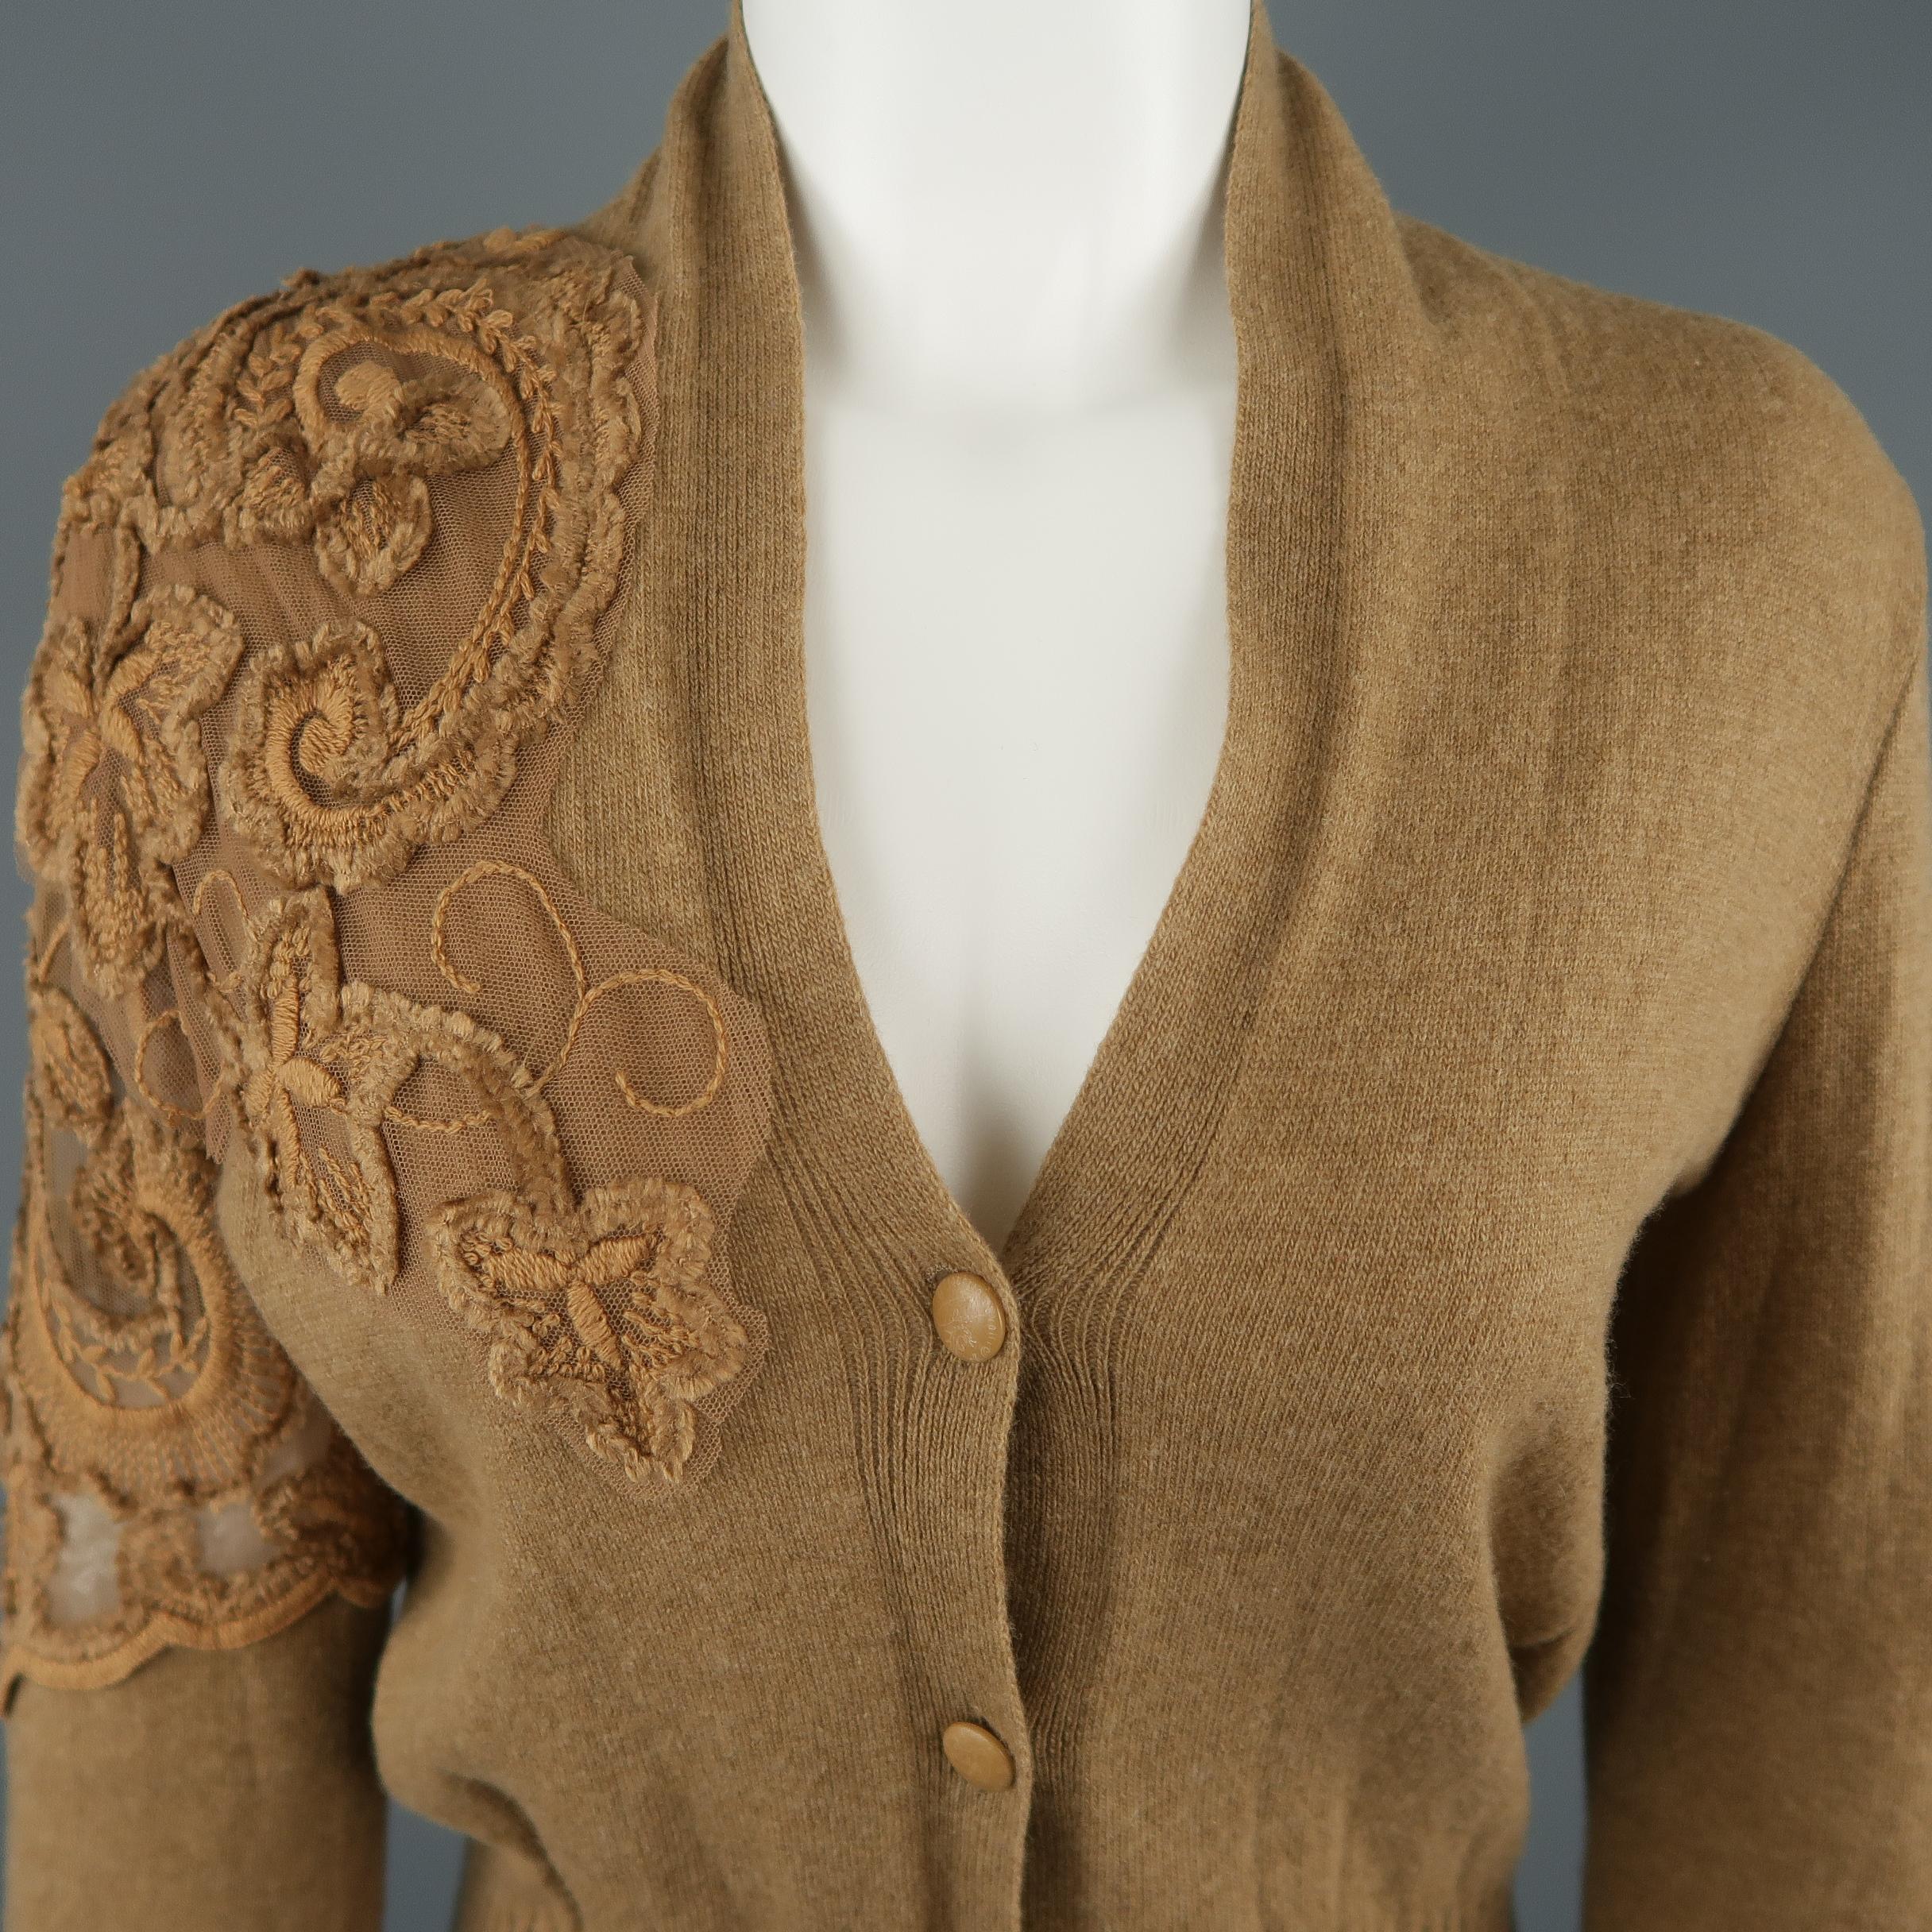 CLASS by ROBERTO CAVALLI cardigan comes in tan wool knit with a V neck, thick ribbed waistband, and asymmetrical floral embroidered lace applique shoulder and sleeve panel. Made in Italy.
 
Excellent Pre-Owned Condition.
Marked: 6
 
Measurements:
